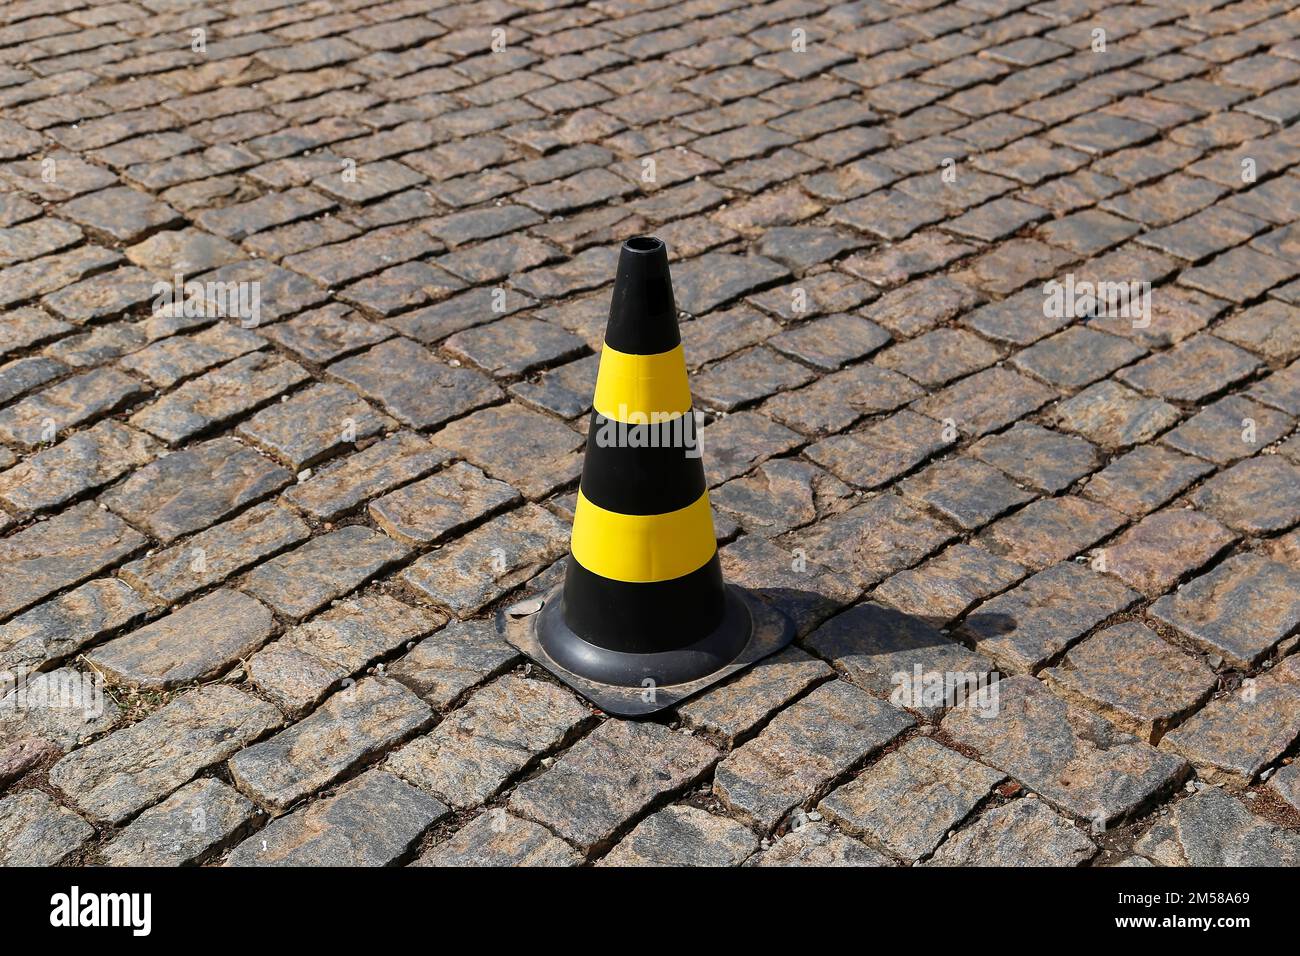 traffic signal cone yellow and black colors, hard plastic, on stone public road Stock Photo